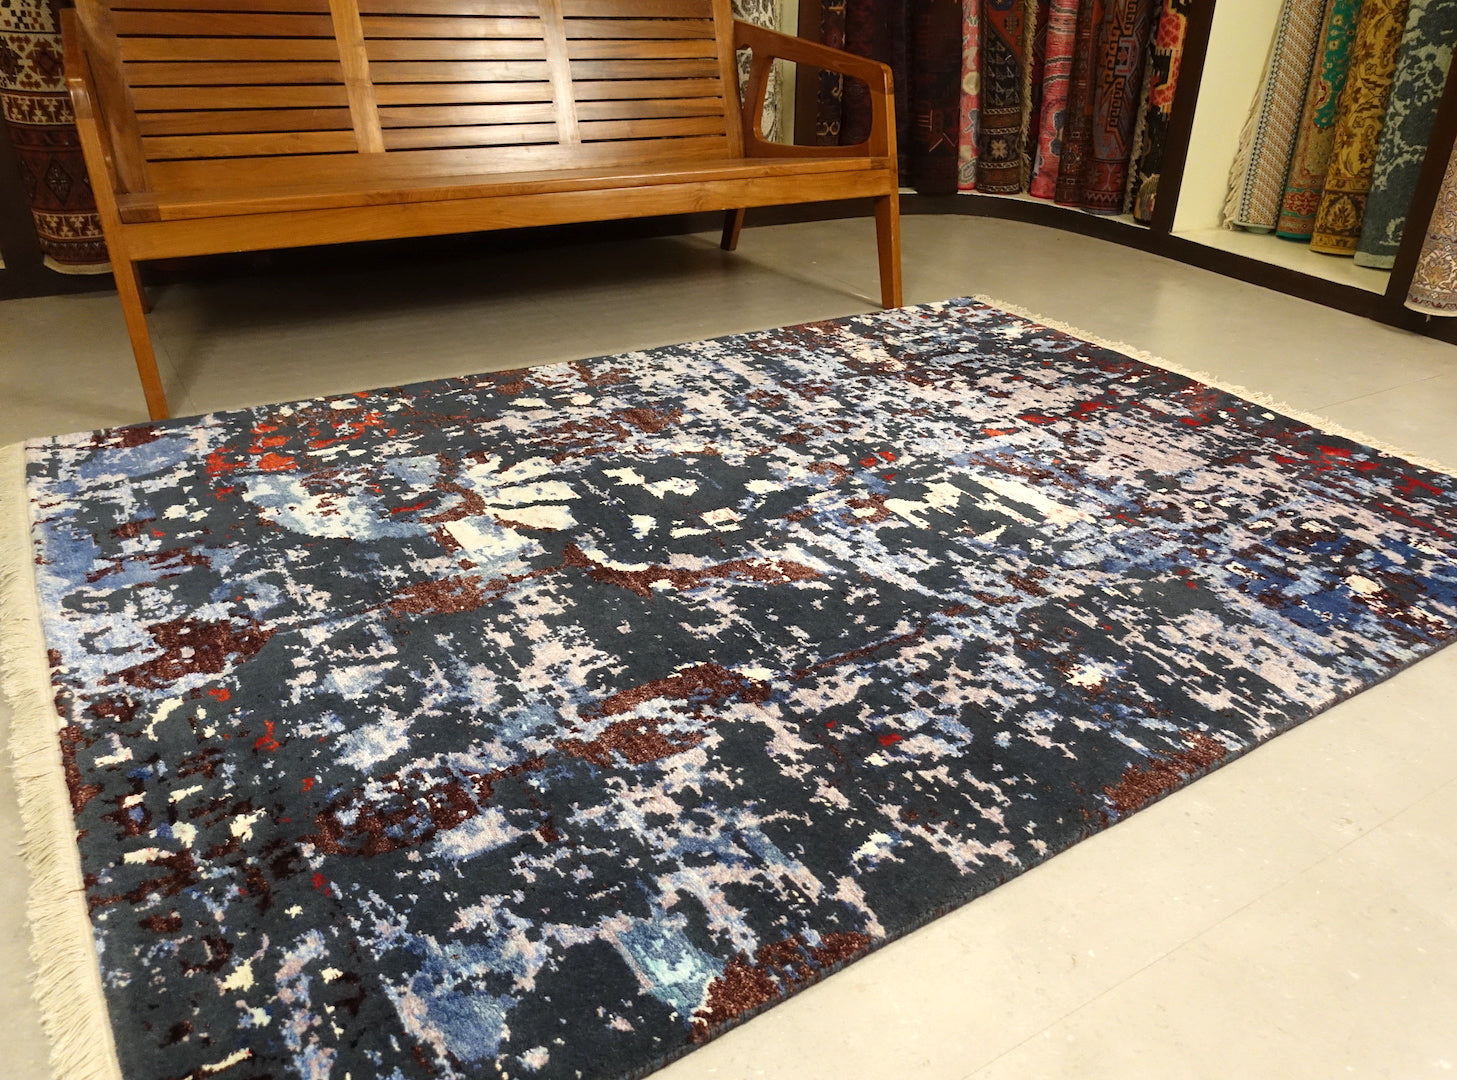 Modern Rugs/Carpet With Abstract Design. Predominantly with Blue and Green Colors. The rug is 5 feet by 7 feet. 